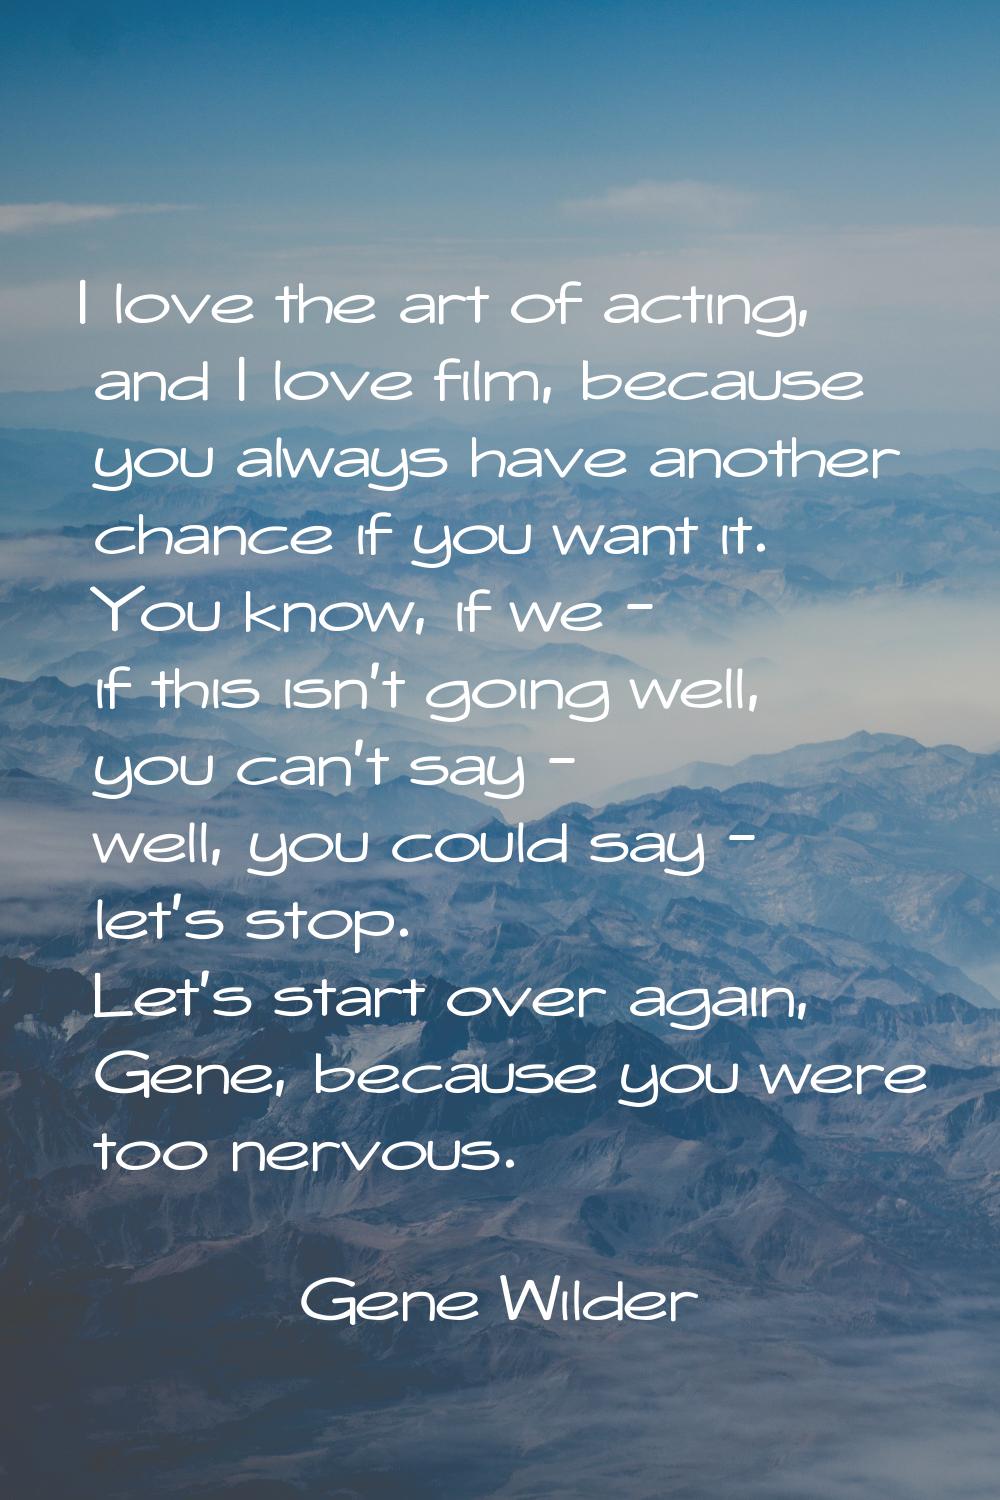 I love the art of acting, and I love film, because you always have another chance if you want it. Y